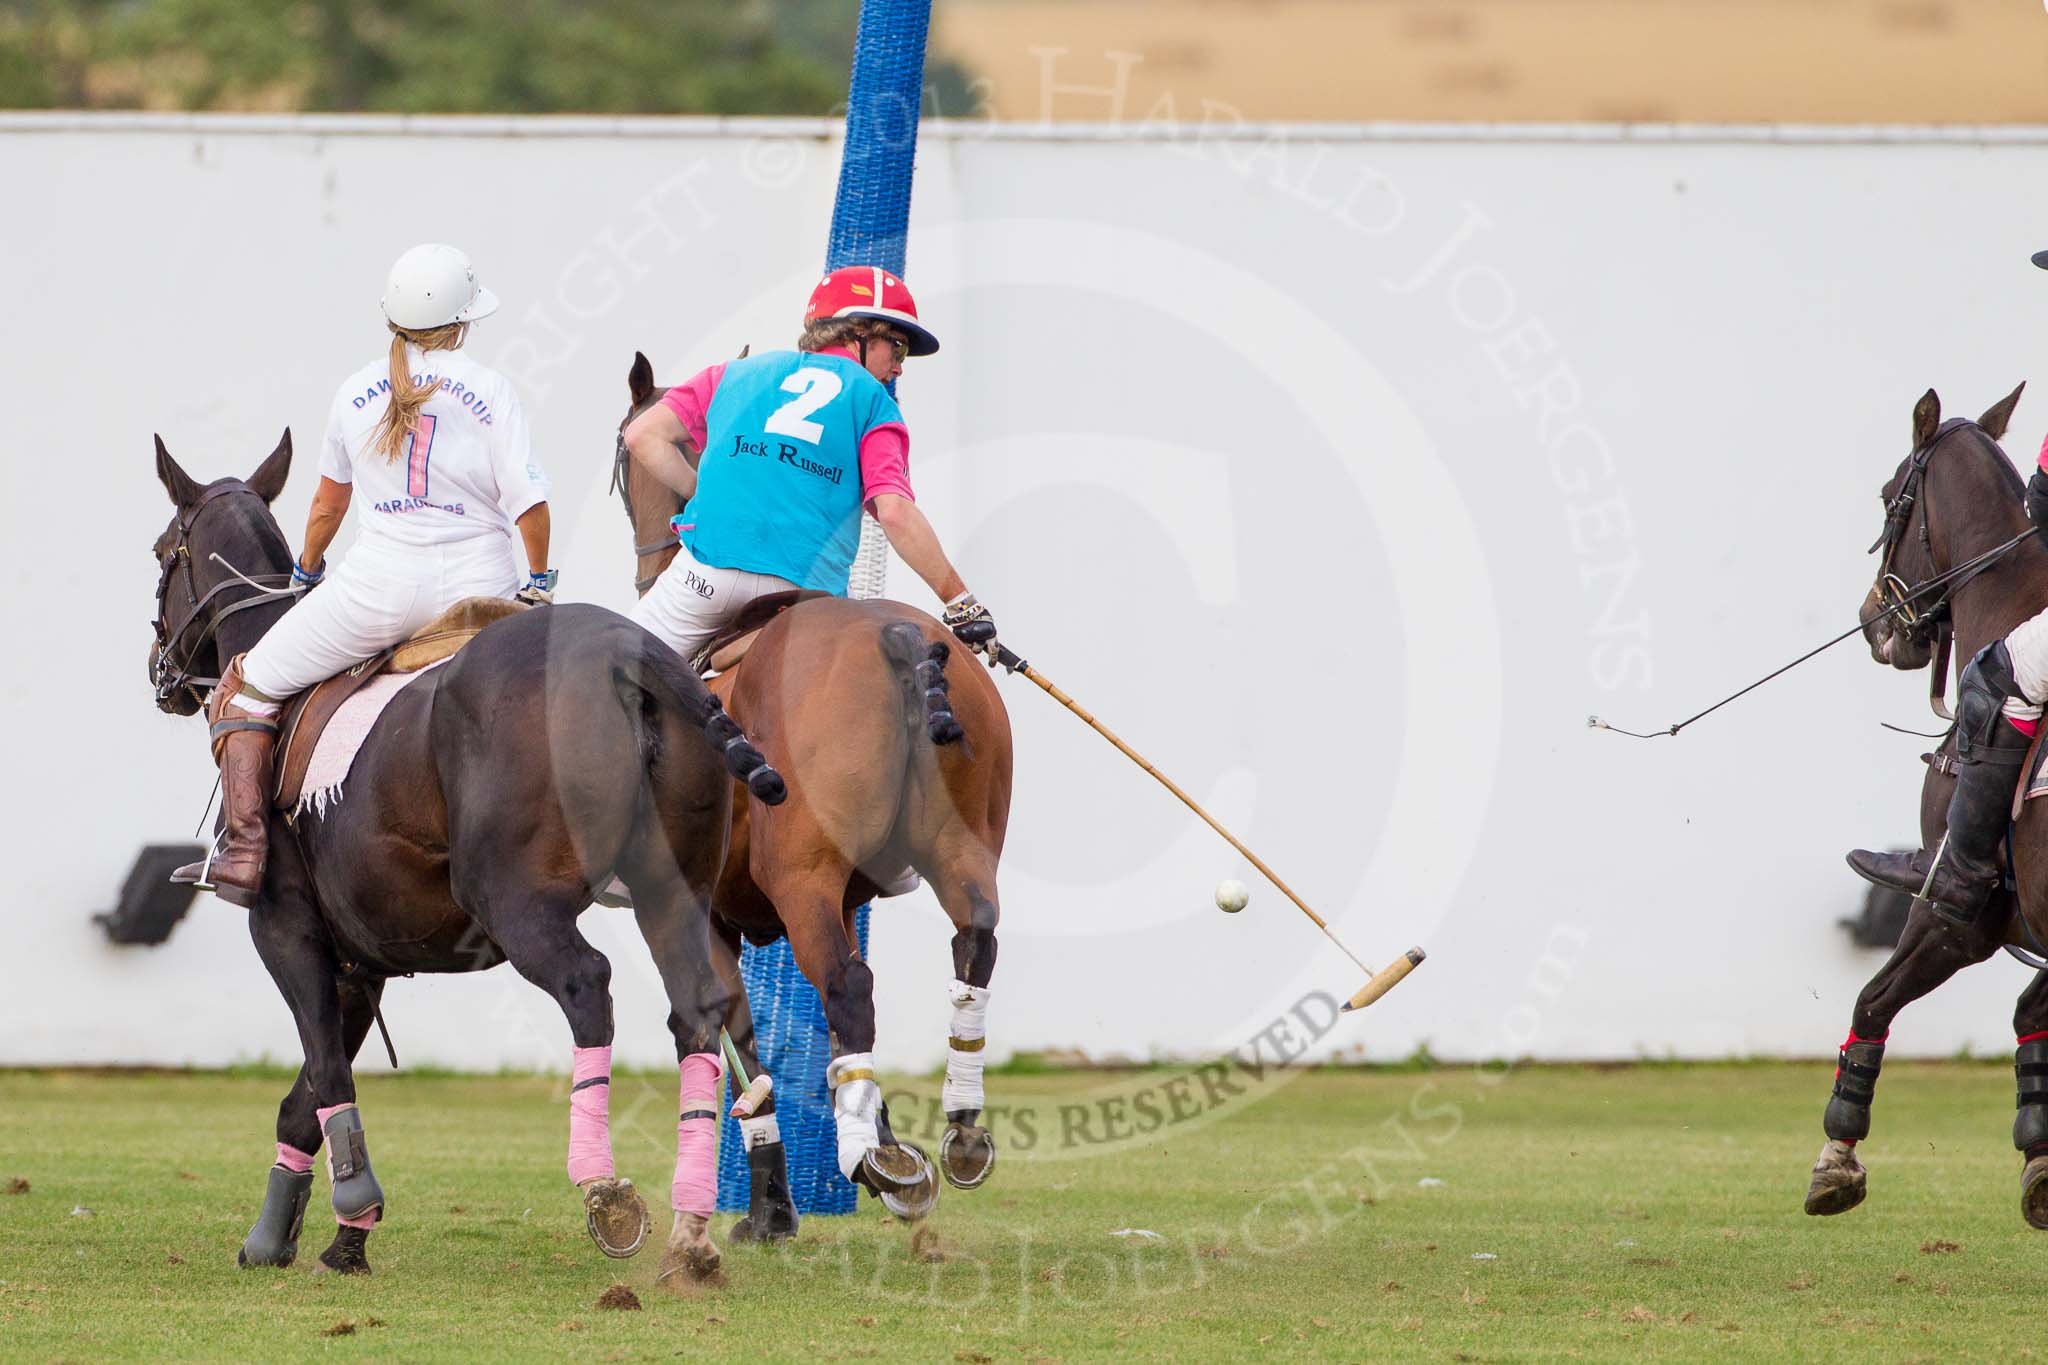 DBPC Polo in the Park 2013, Subsidiary Final Tusk Trophy (4 Goal), Dawson Group vs High Point.
Dallas Burston Polo Club, ,
Southam,
Warwickshire,
United Kingdom,
on 01 September 2013 at 18:20, image #686